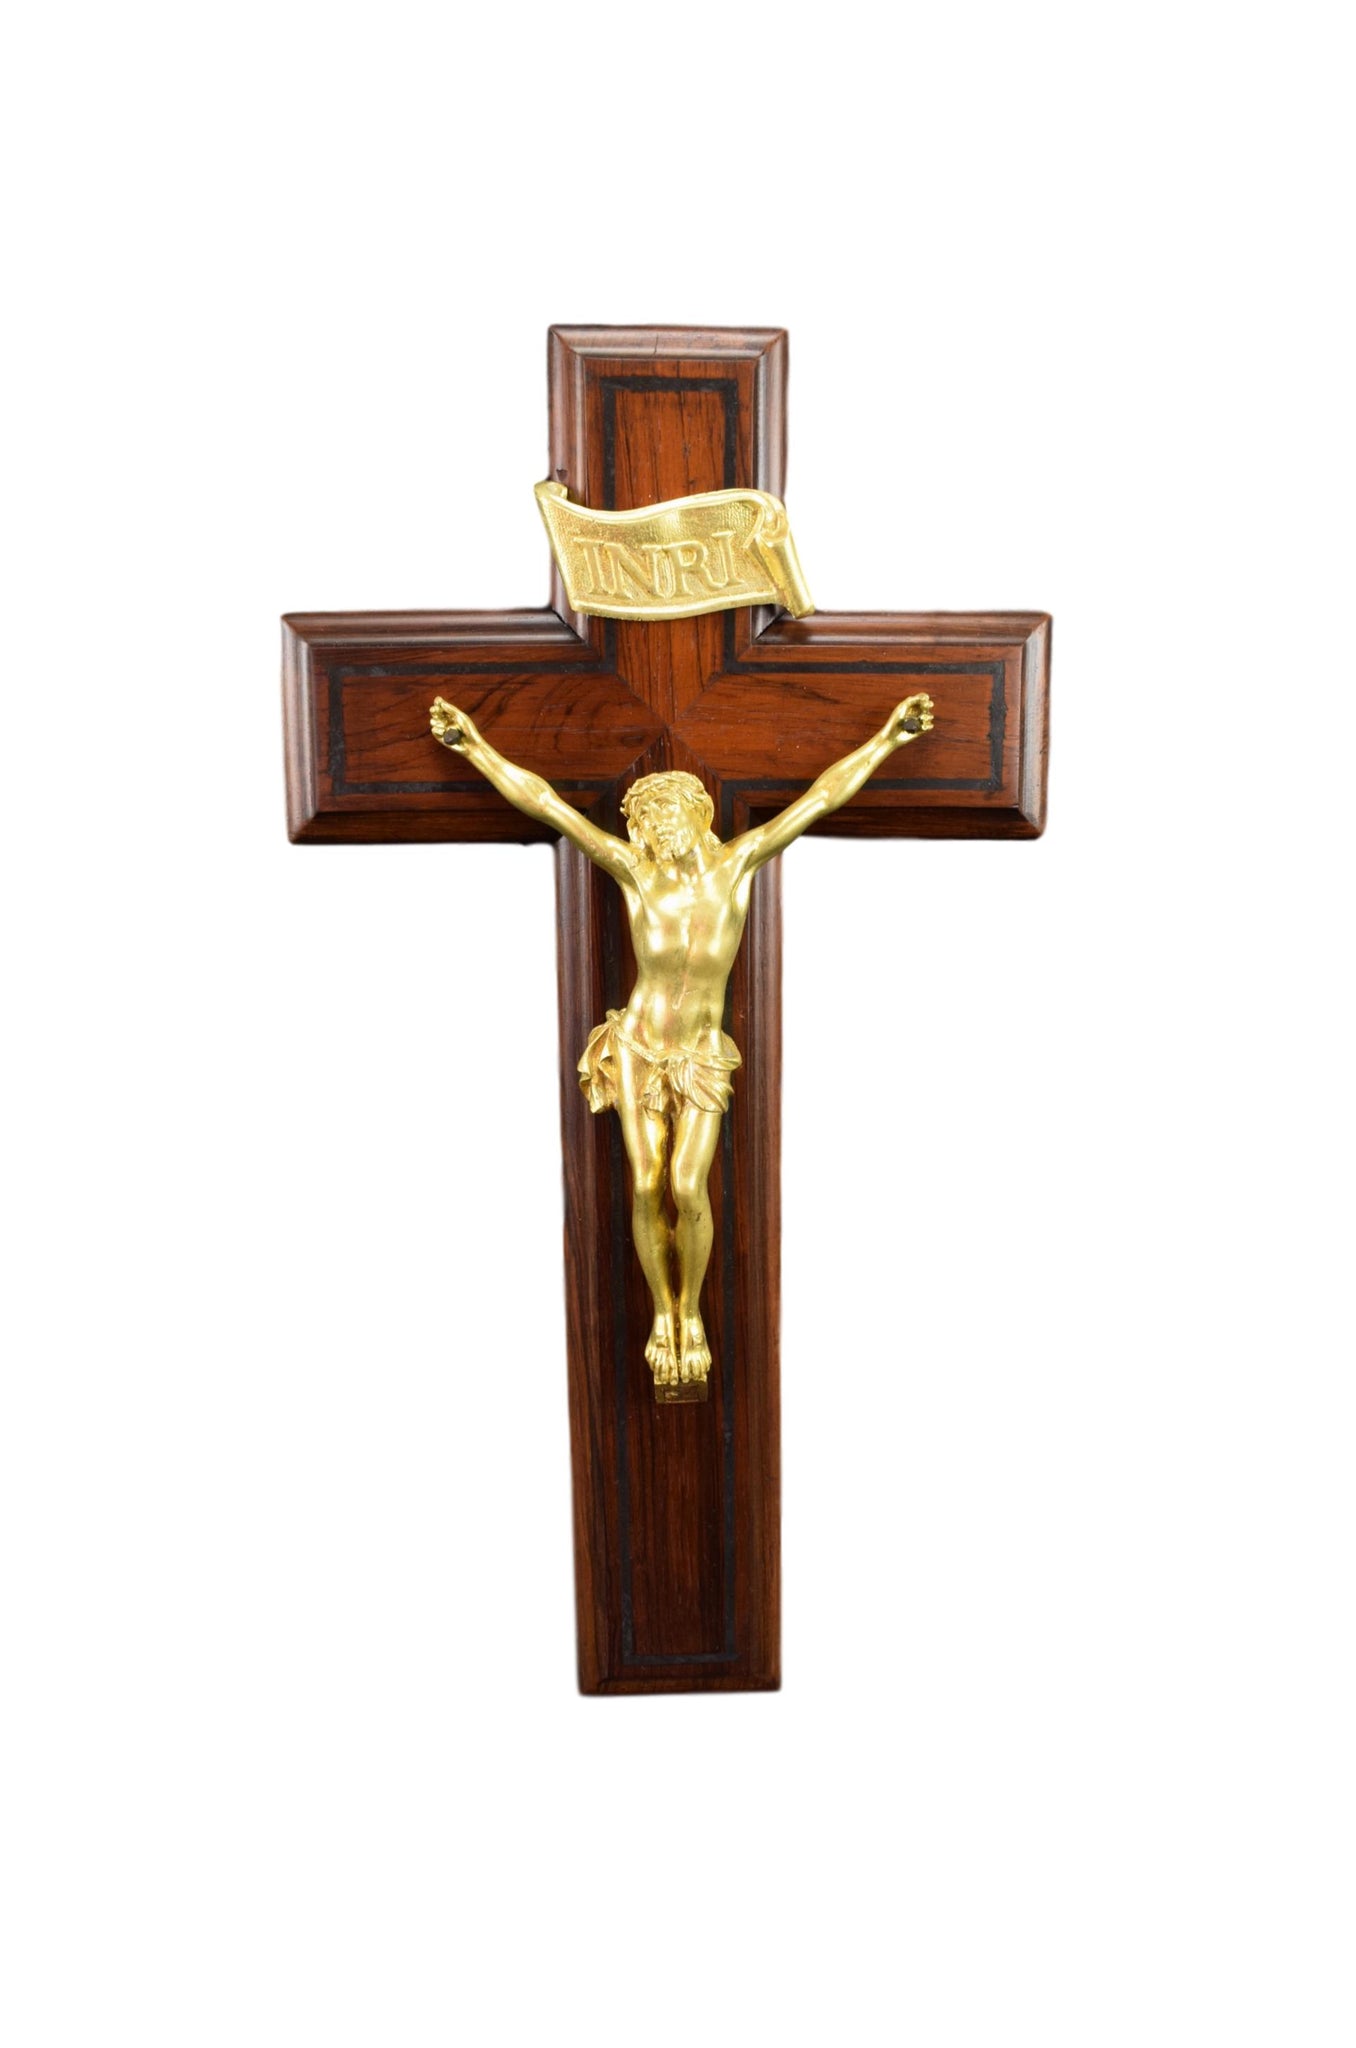 French Art Deco Large Bronze and Wood Wall Cross Crucifix